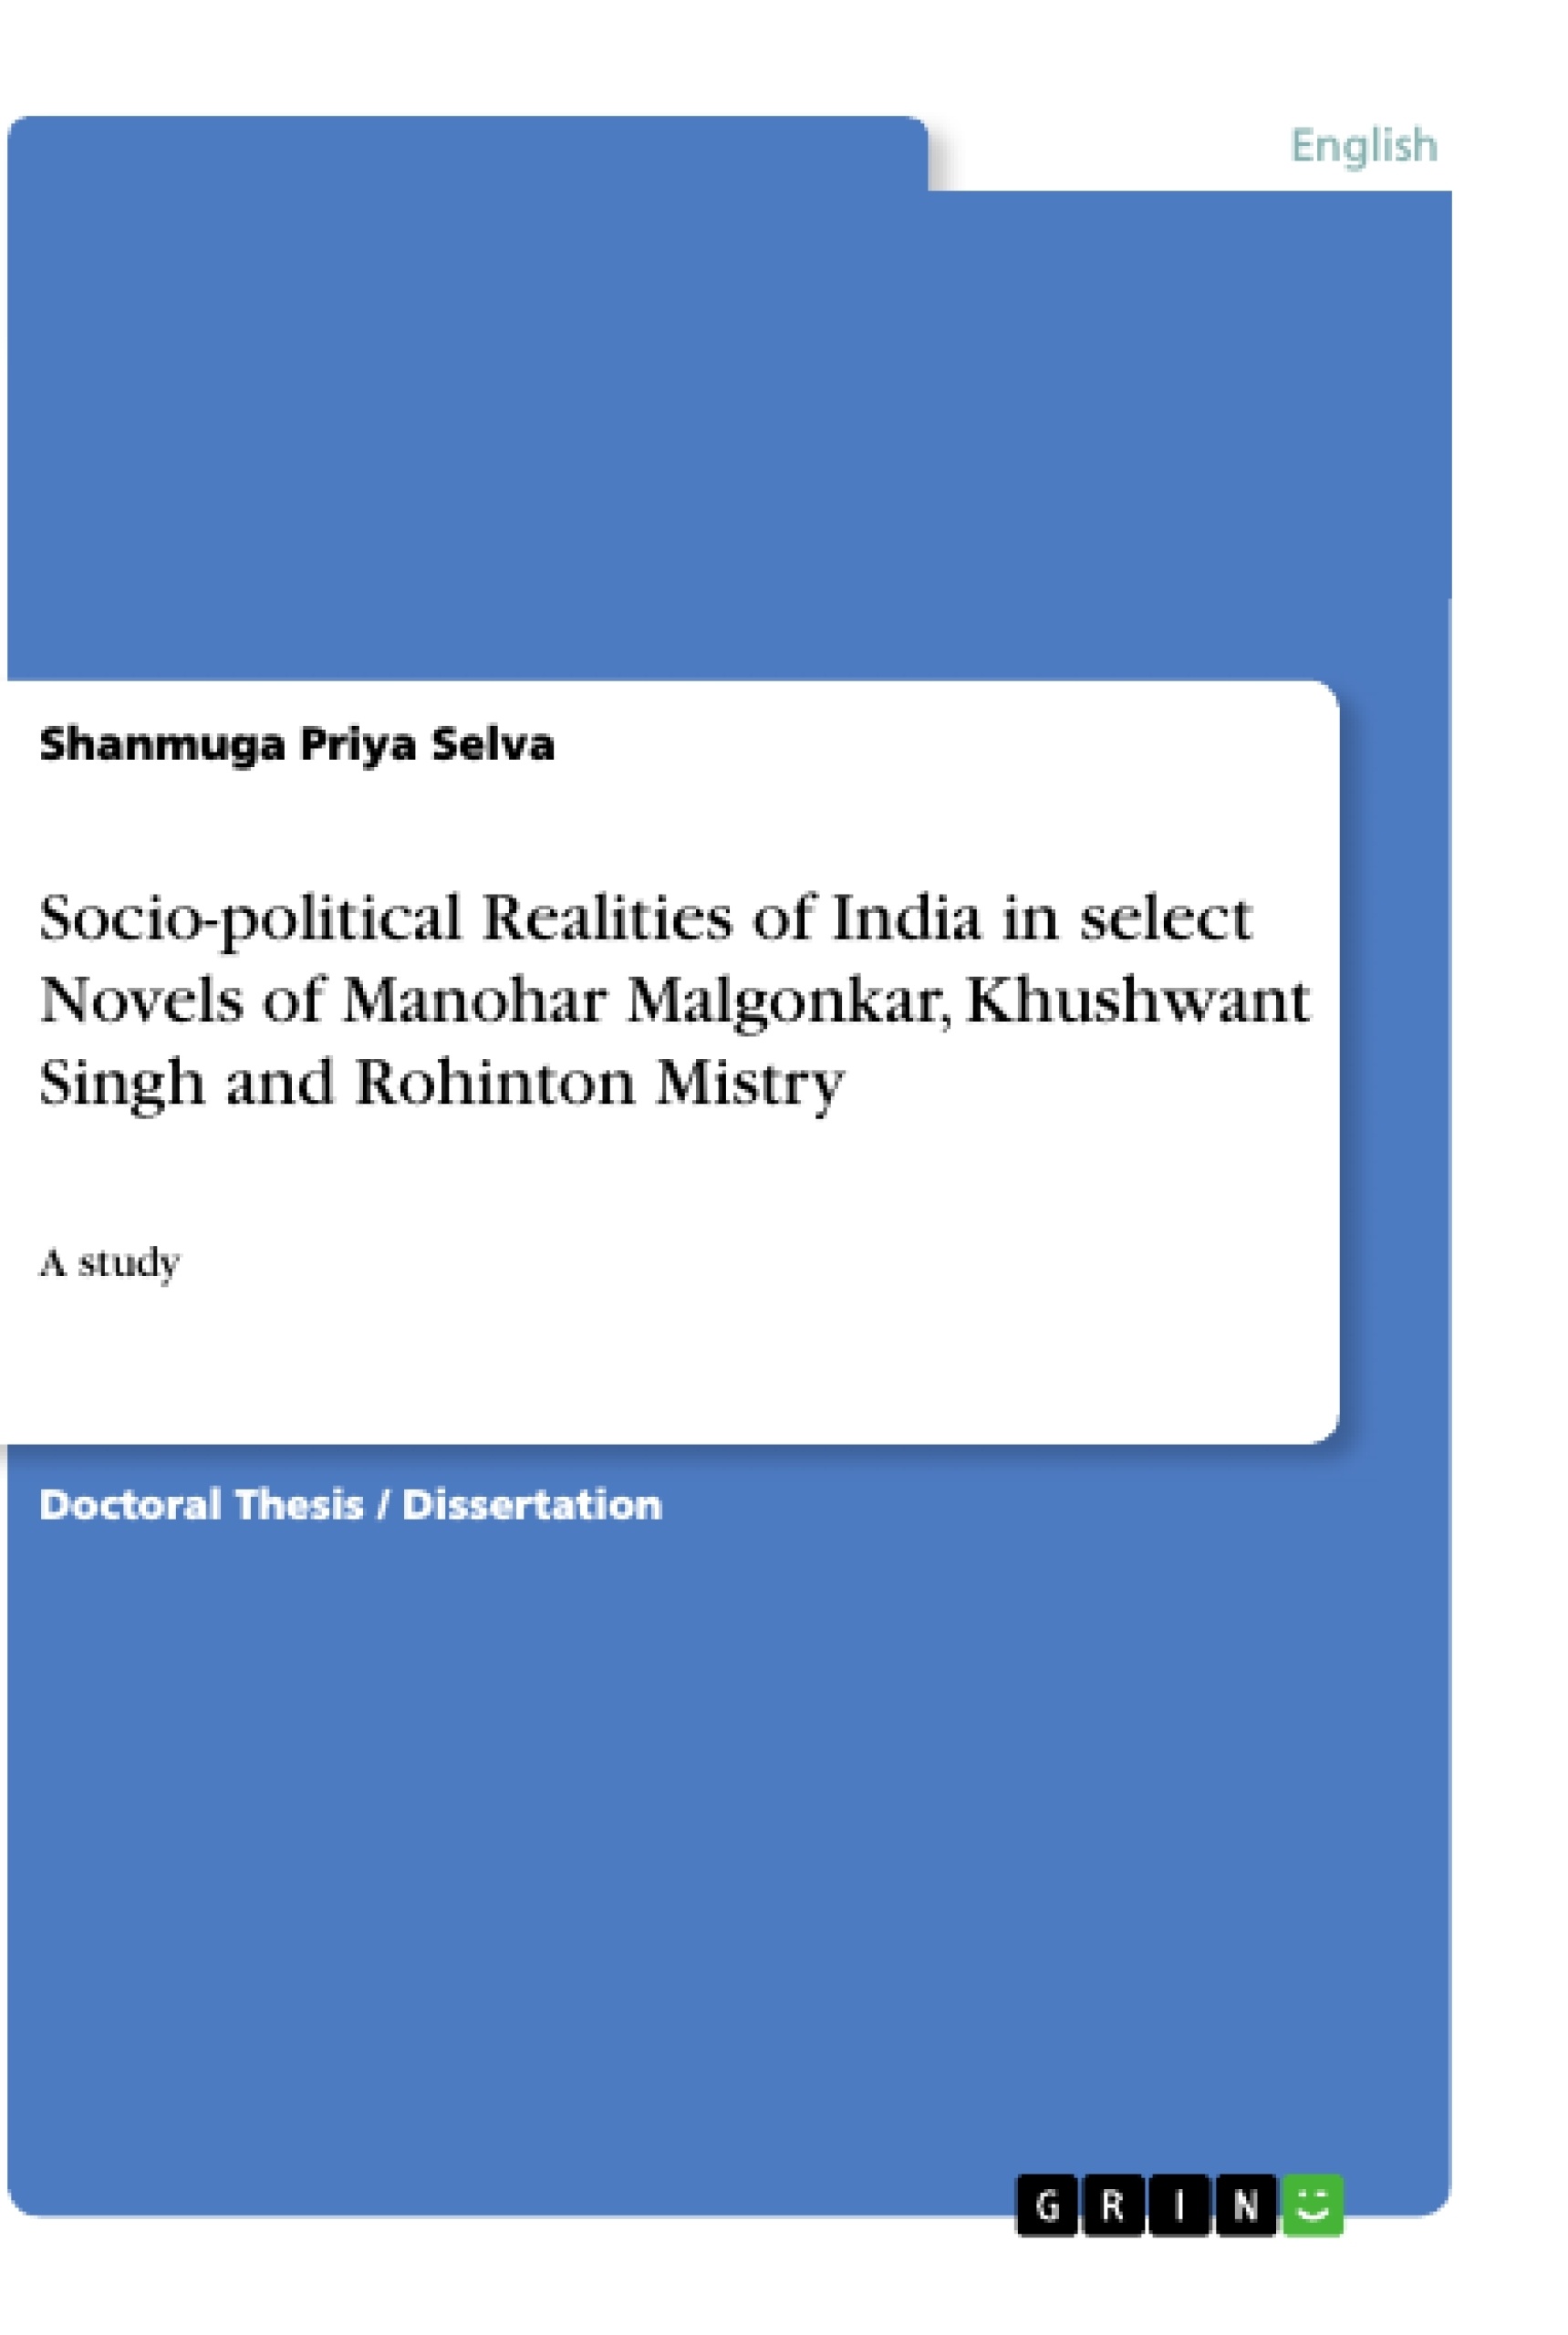 Título: Socio-political Realities of India in select Novels of Manohar Malgonkar, Khushwant Singh and Rohinton Mistry